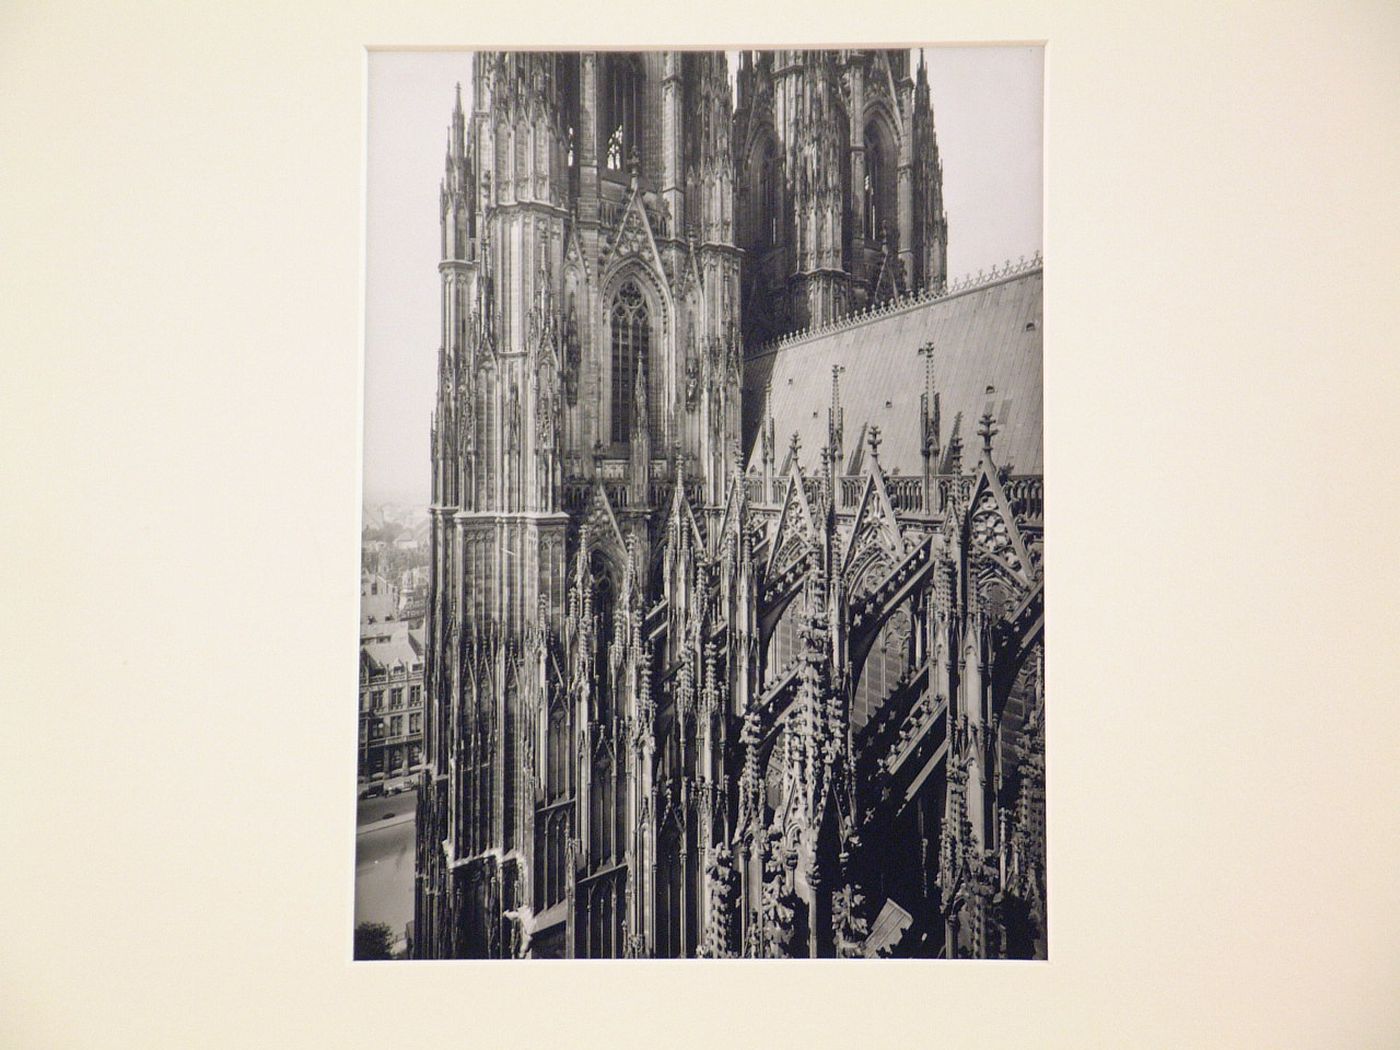 Detail, exterior of the Kölner Dom showing part of towers, nave roof, and butresses, Cologne, Germany